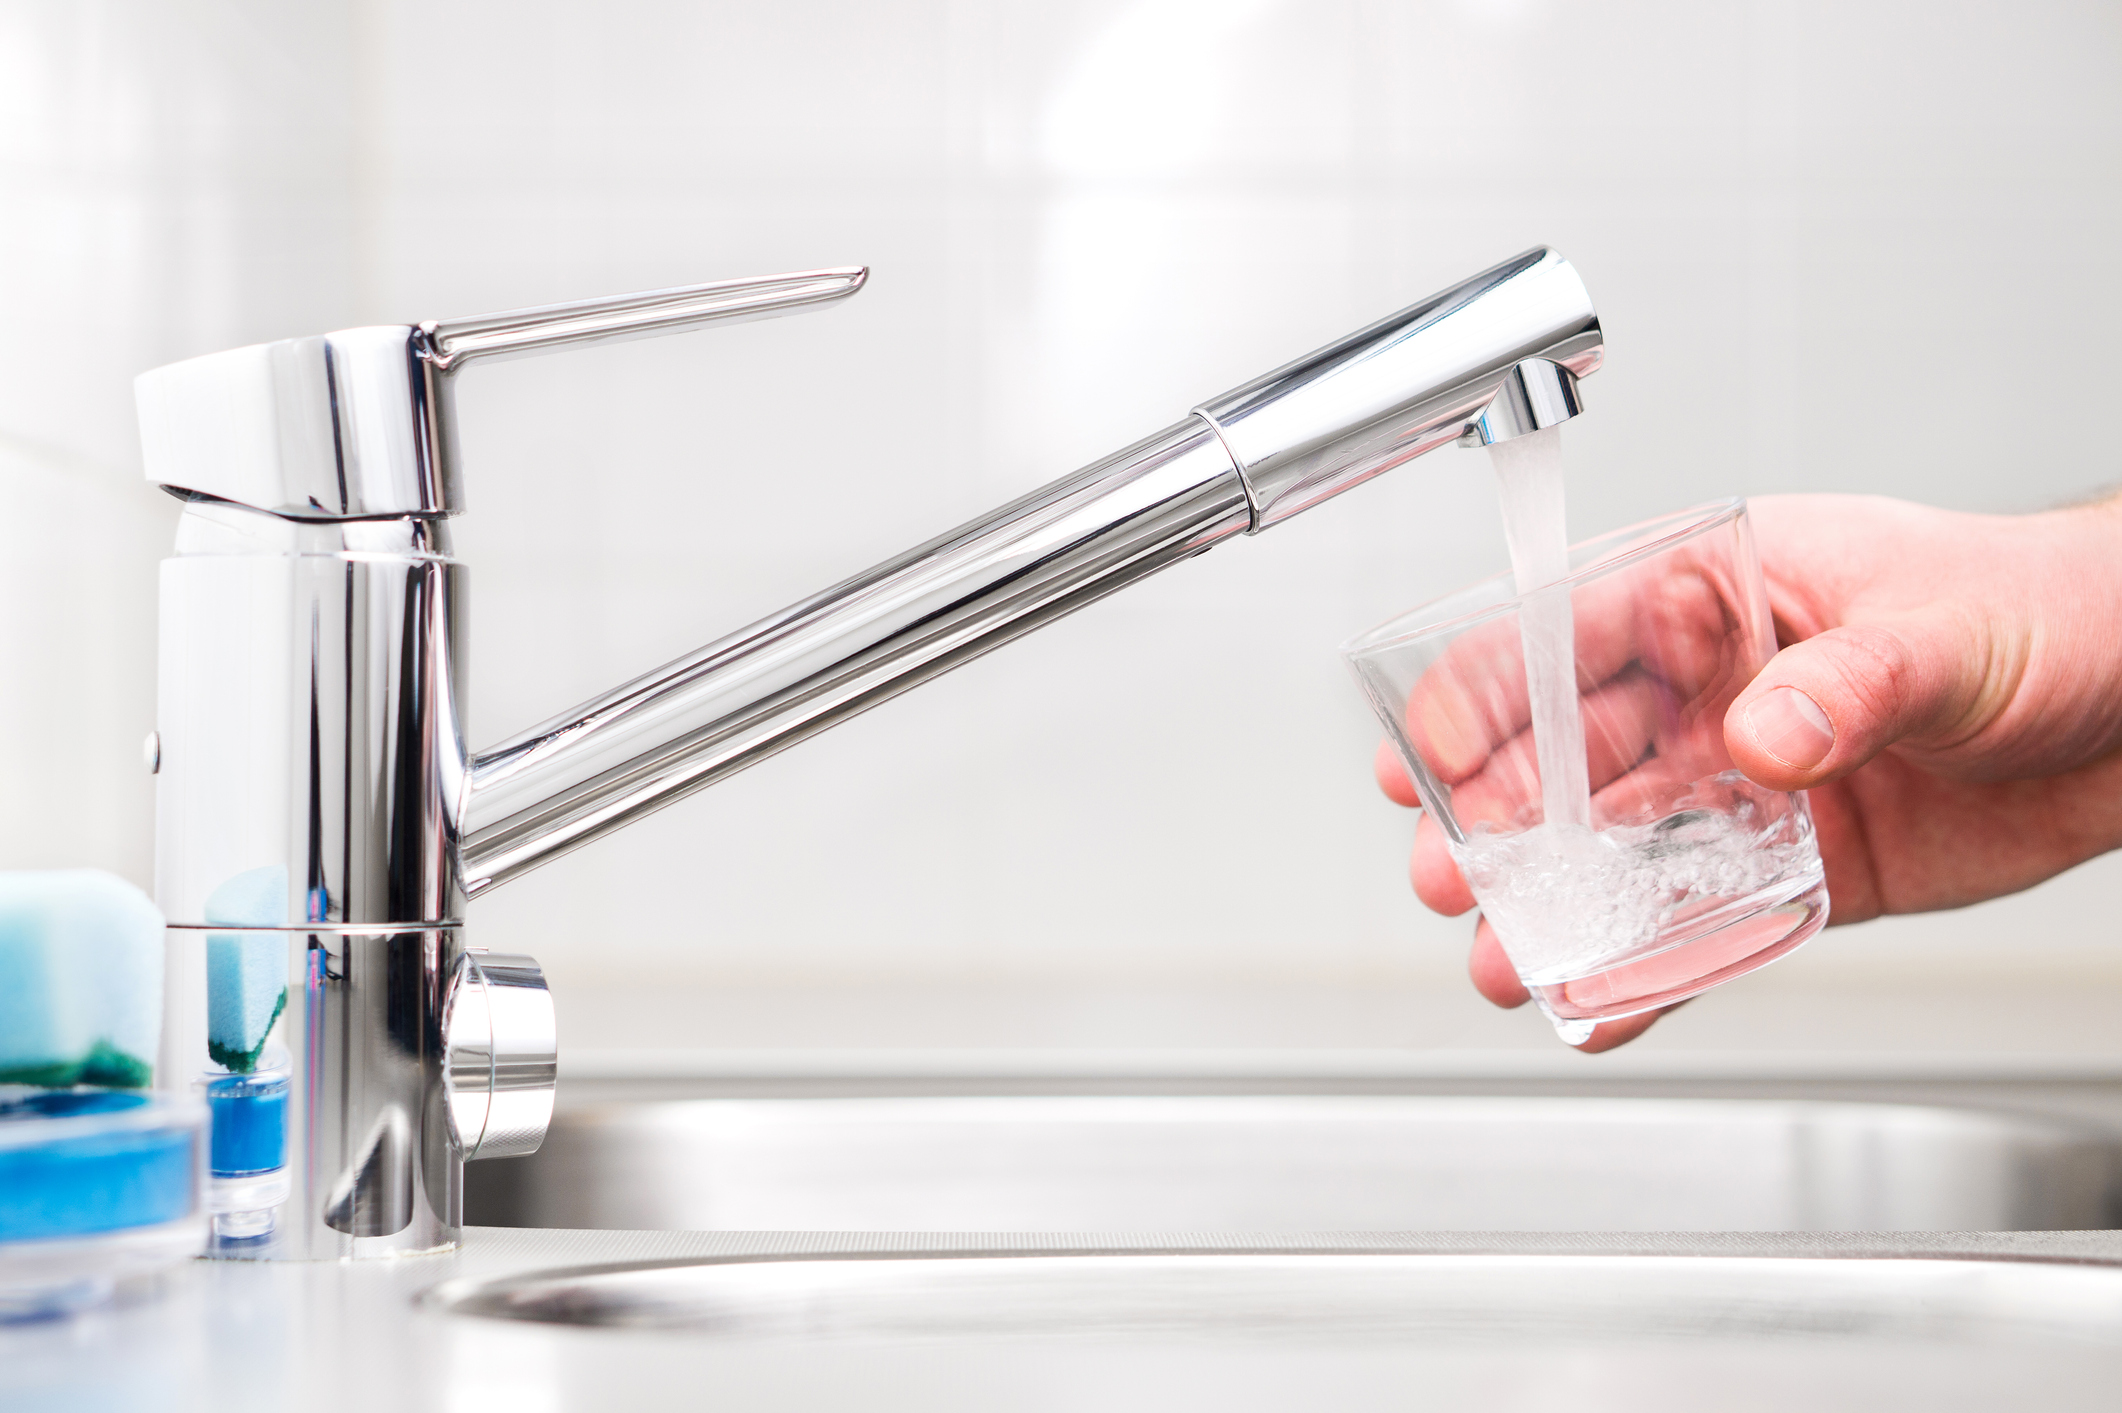 A hand holding a clear water glass under a running sink faucet